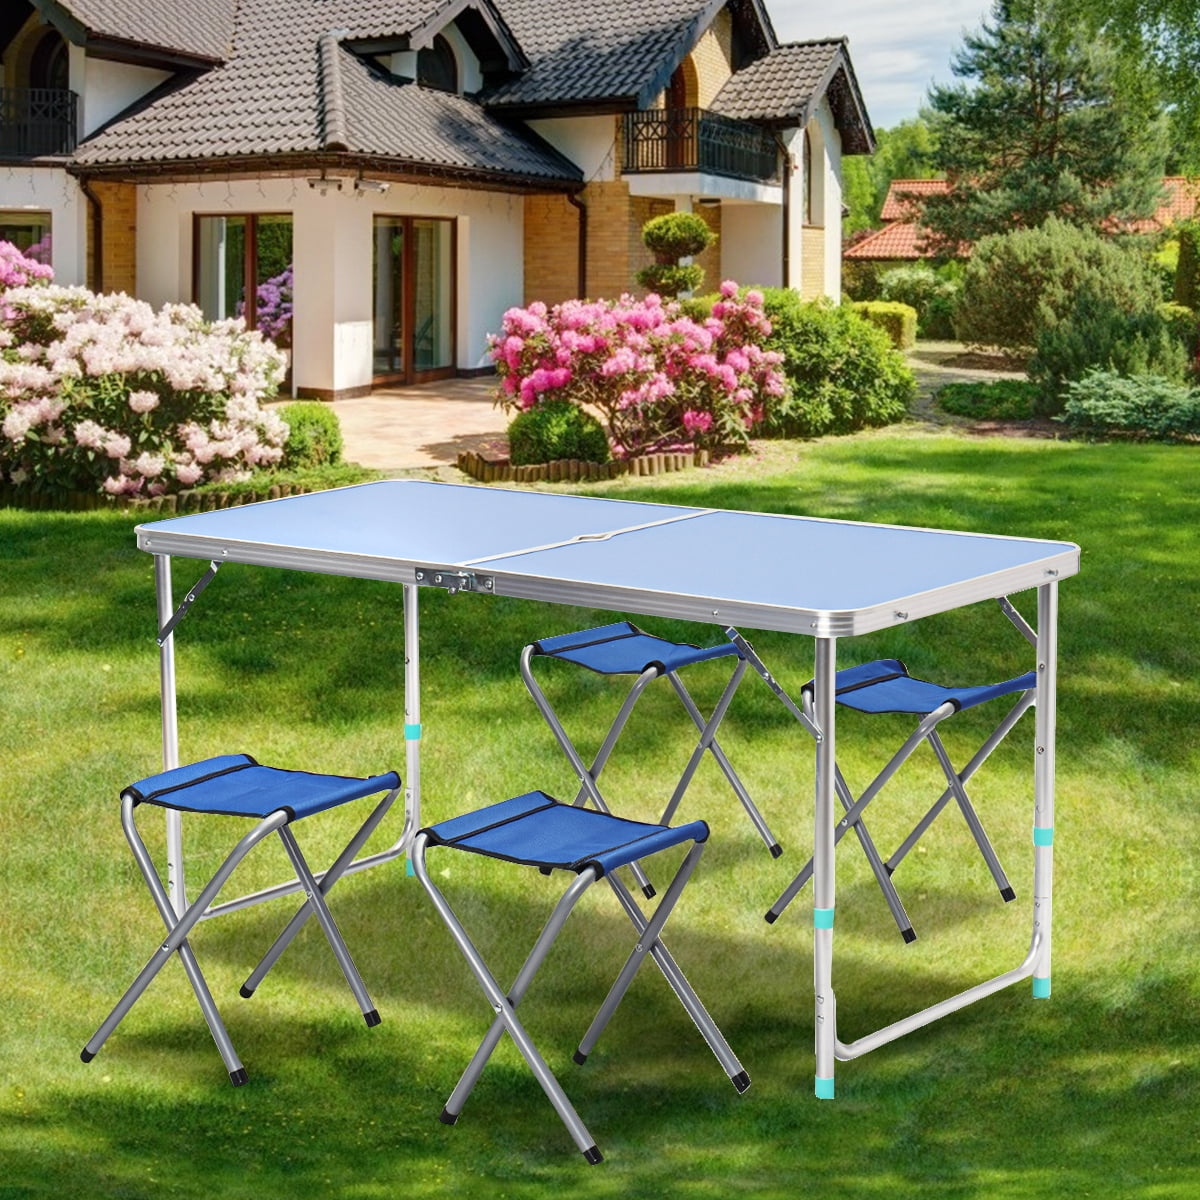 Portable Aluminum Folding Table In/Outdoor Picnic Party Dining Camping Tabl 